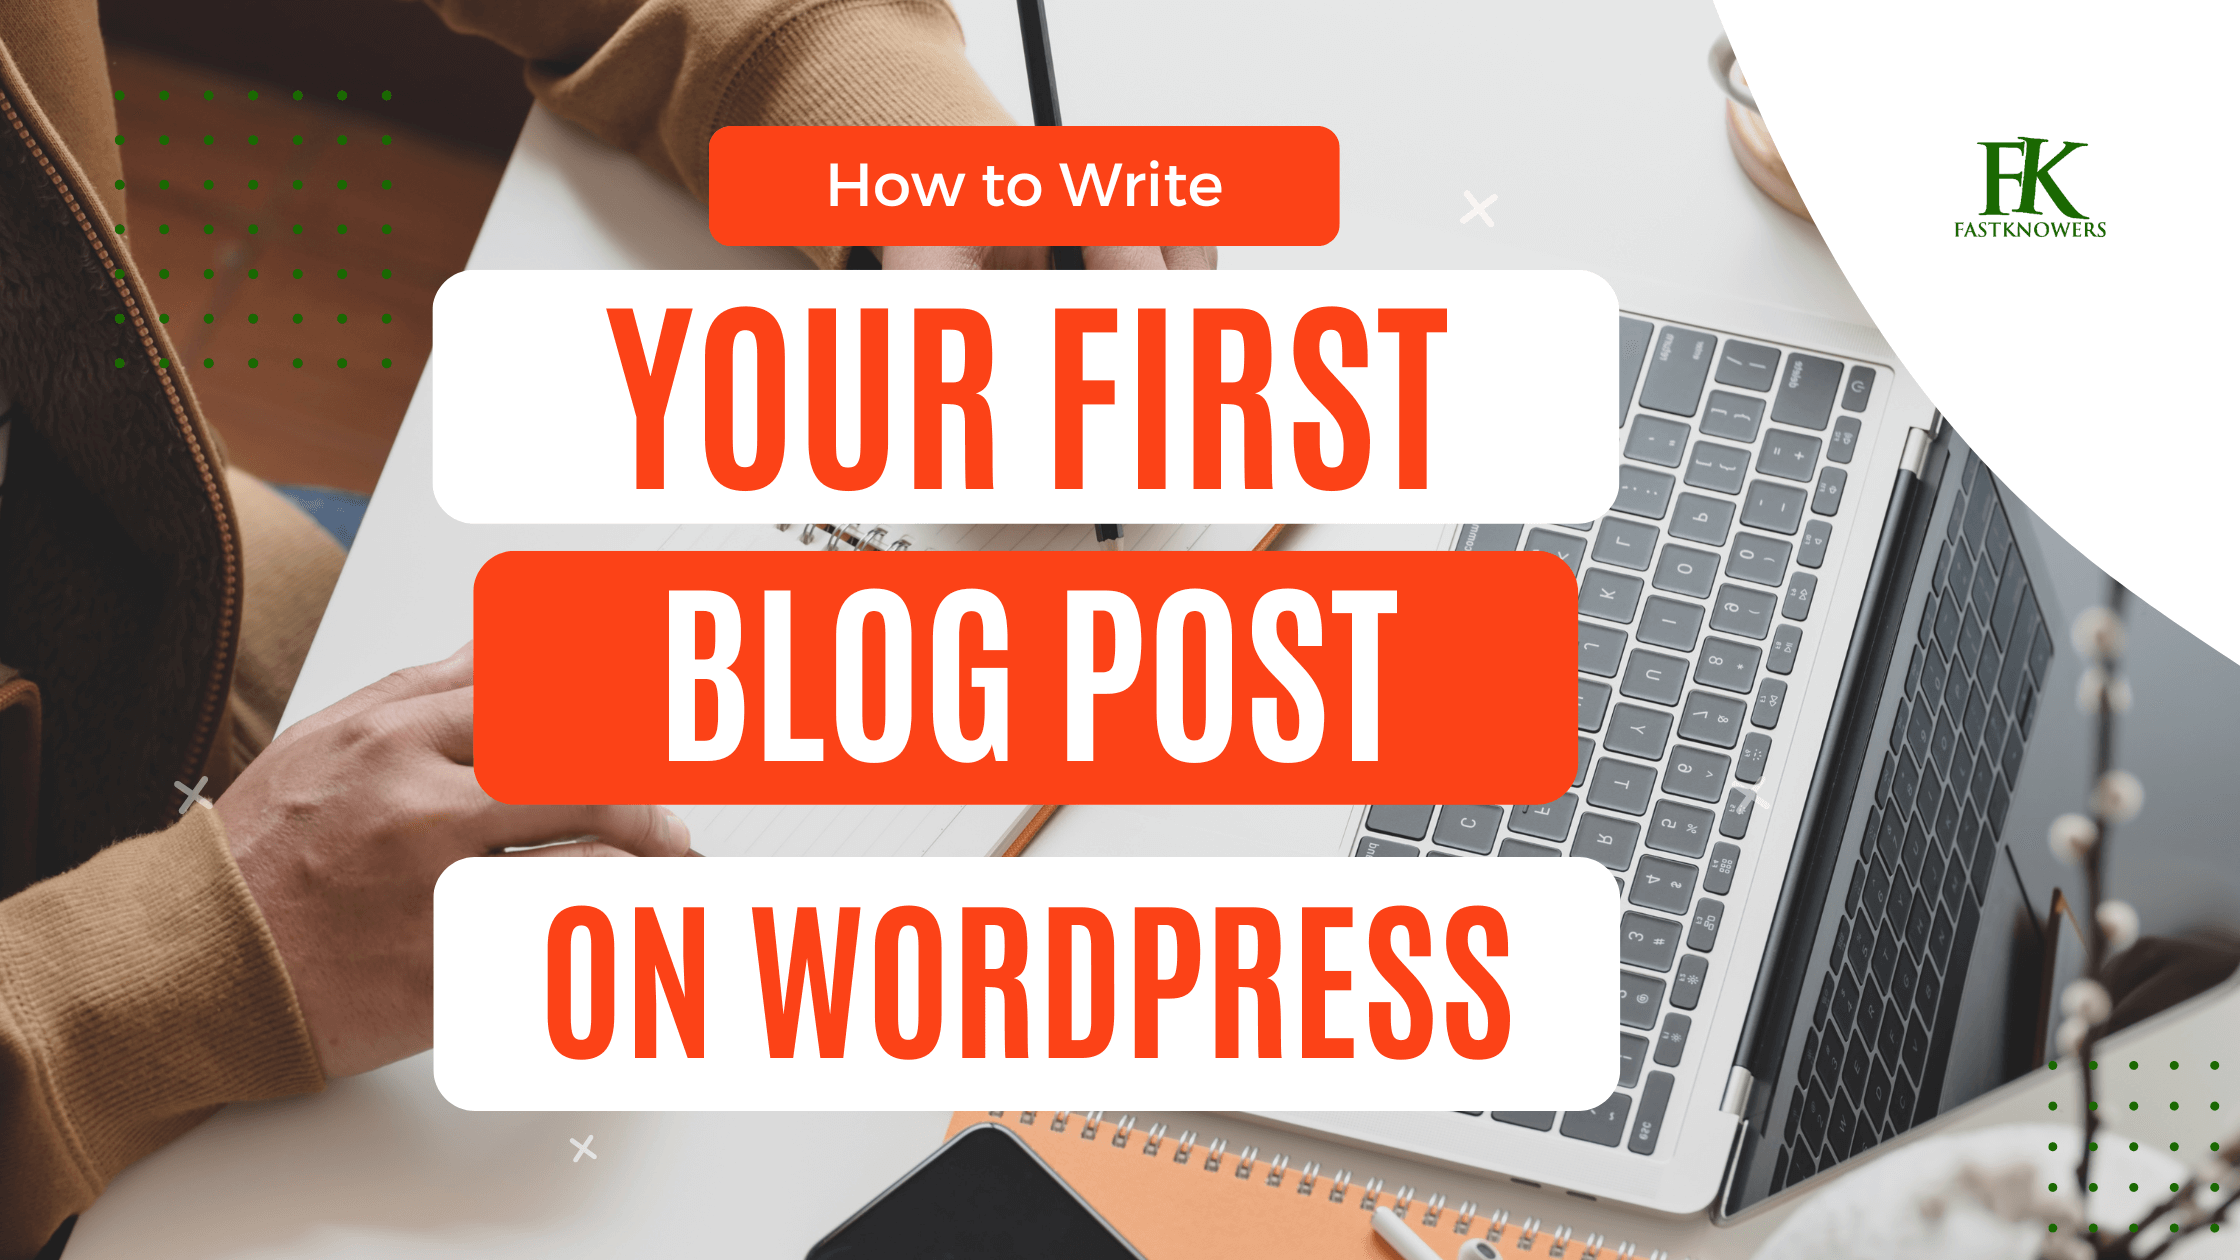 How to write a blog post on WordPress for the first time